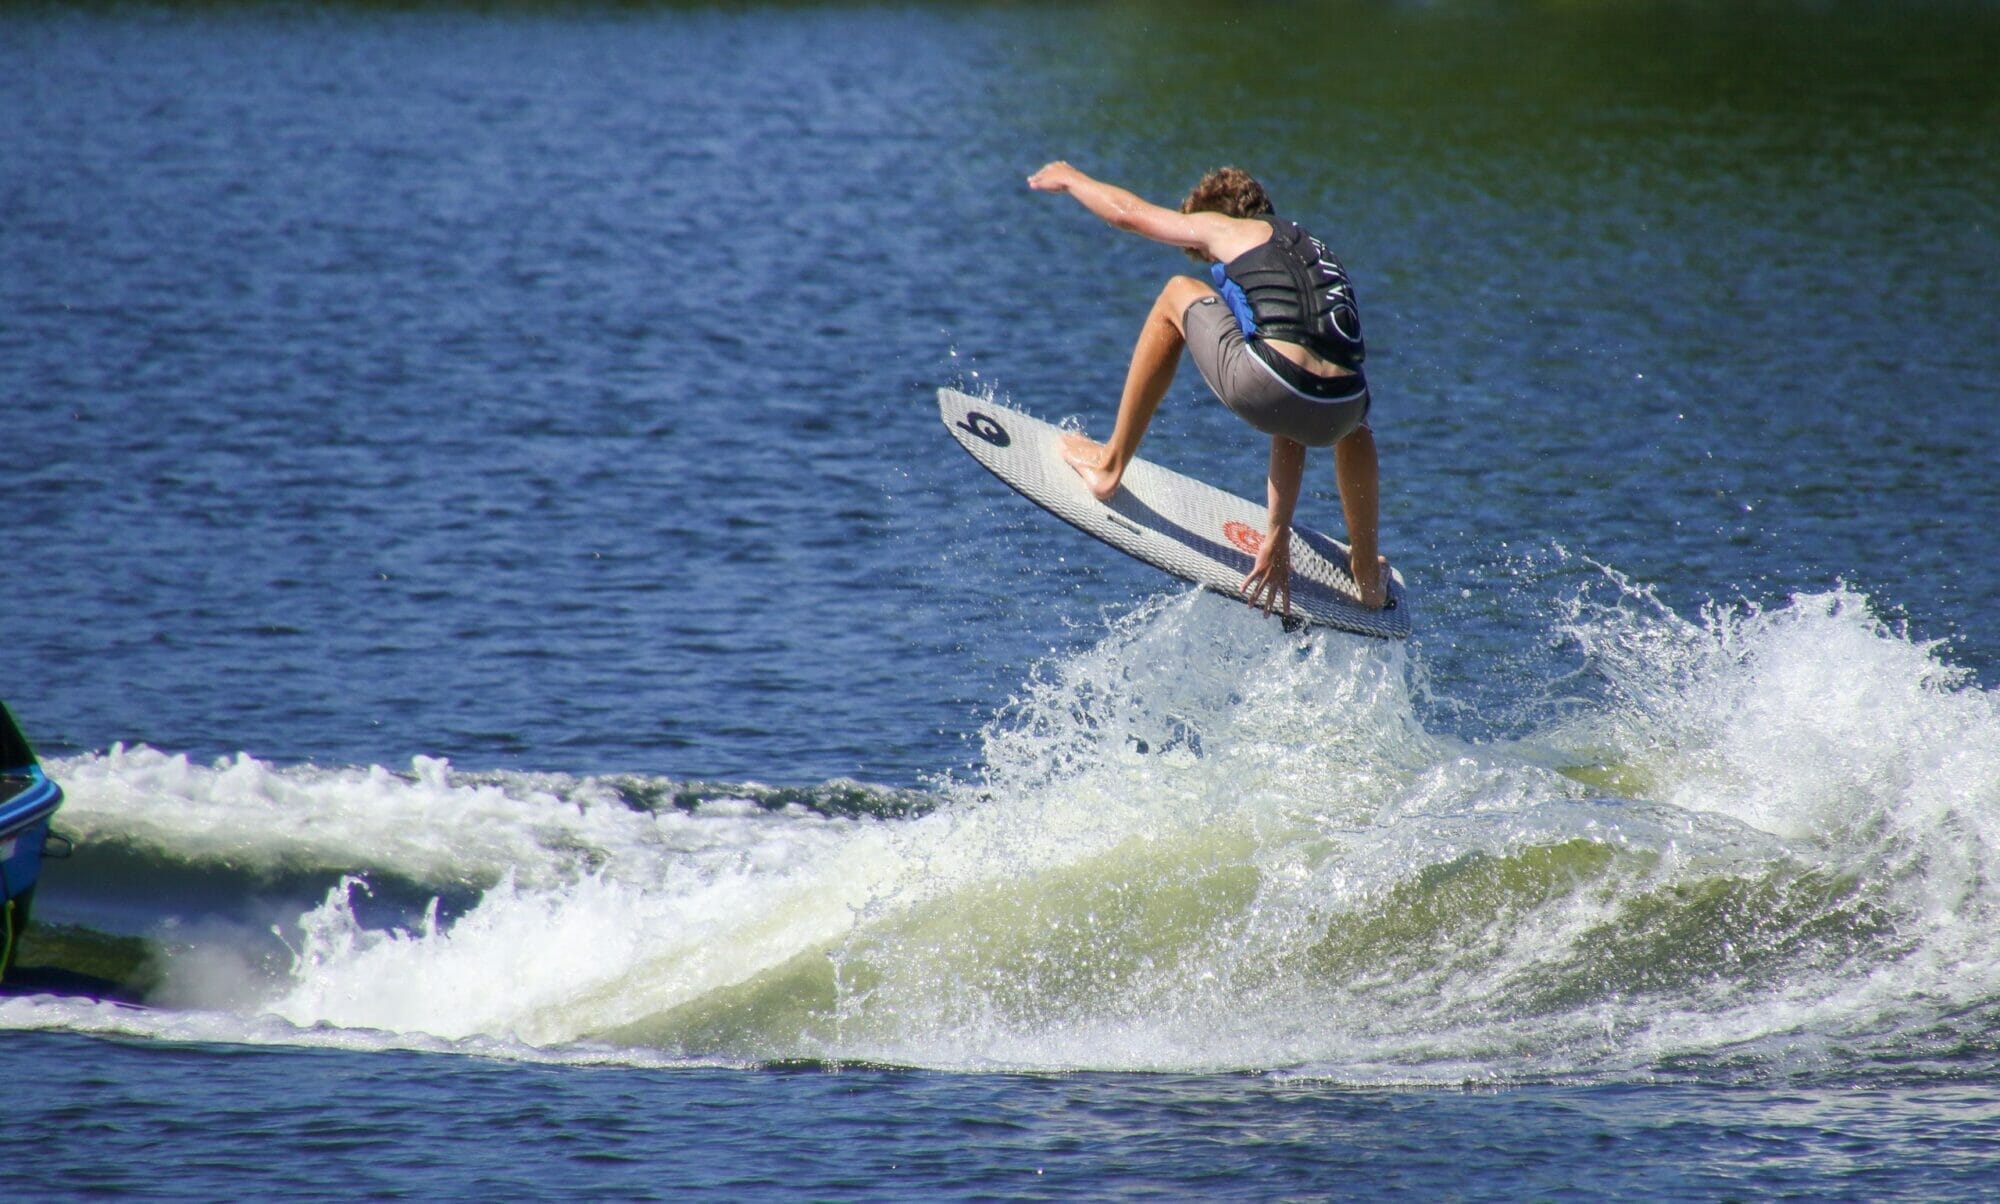 A man is riding a surfboard.